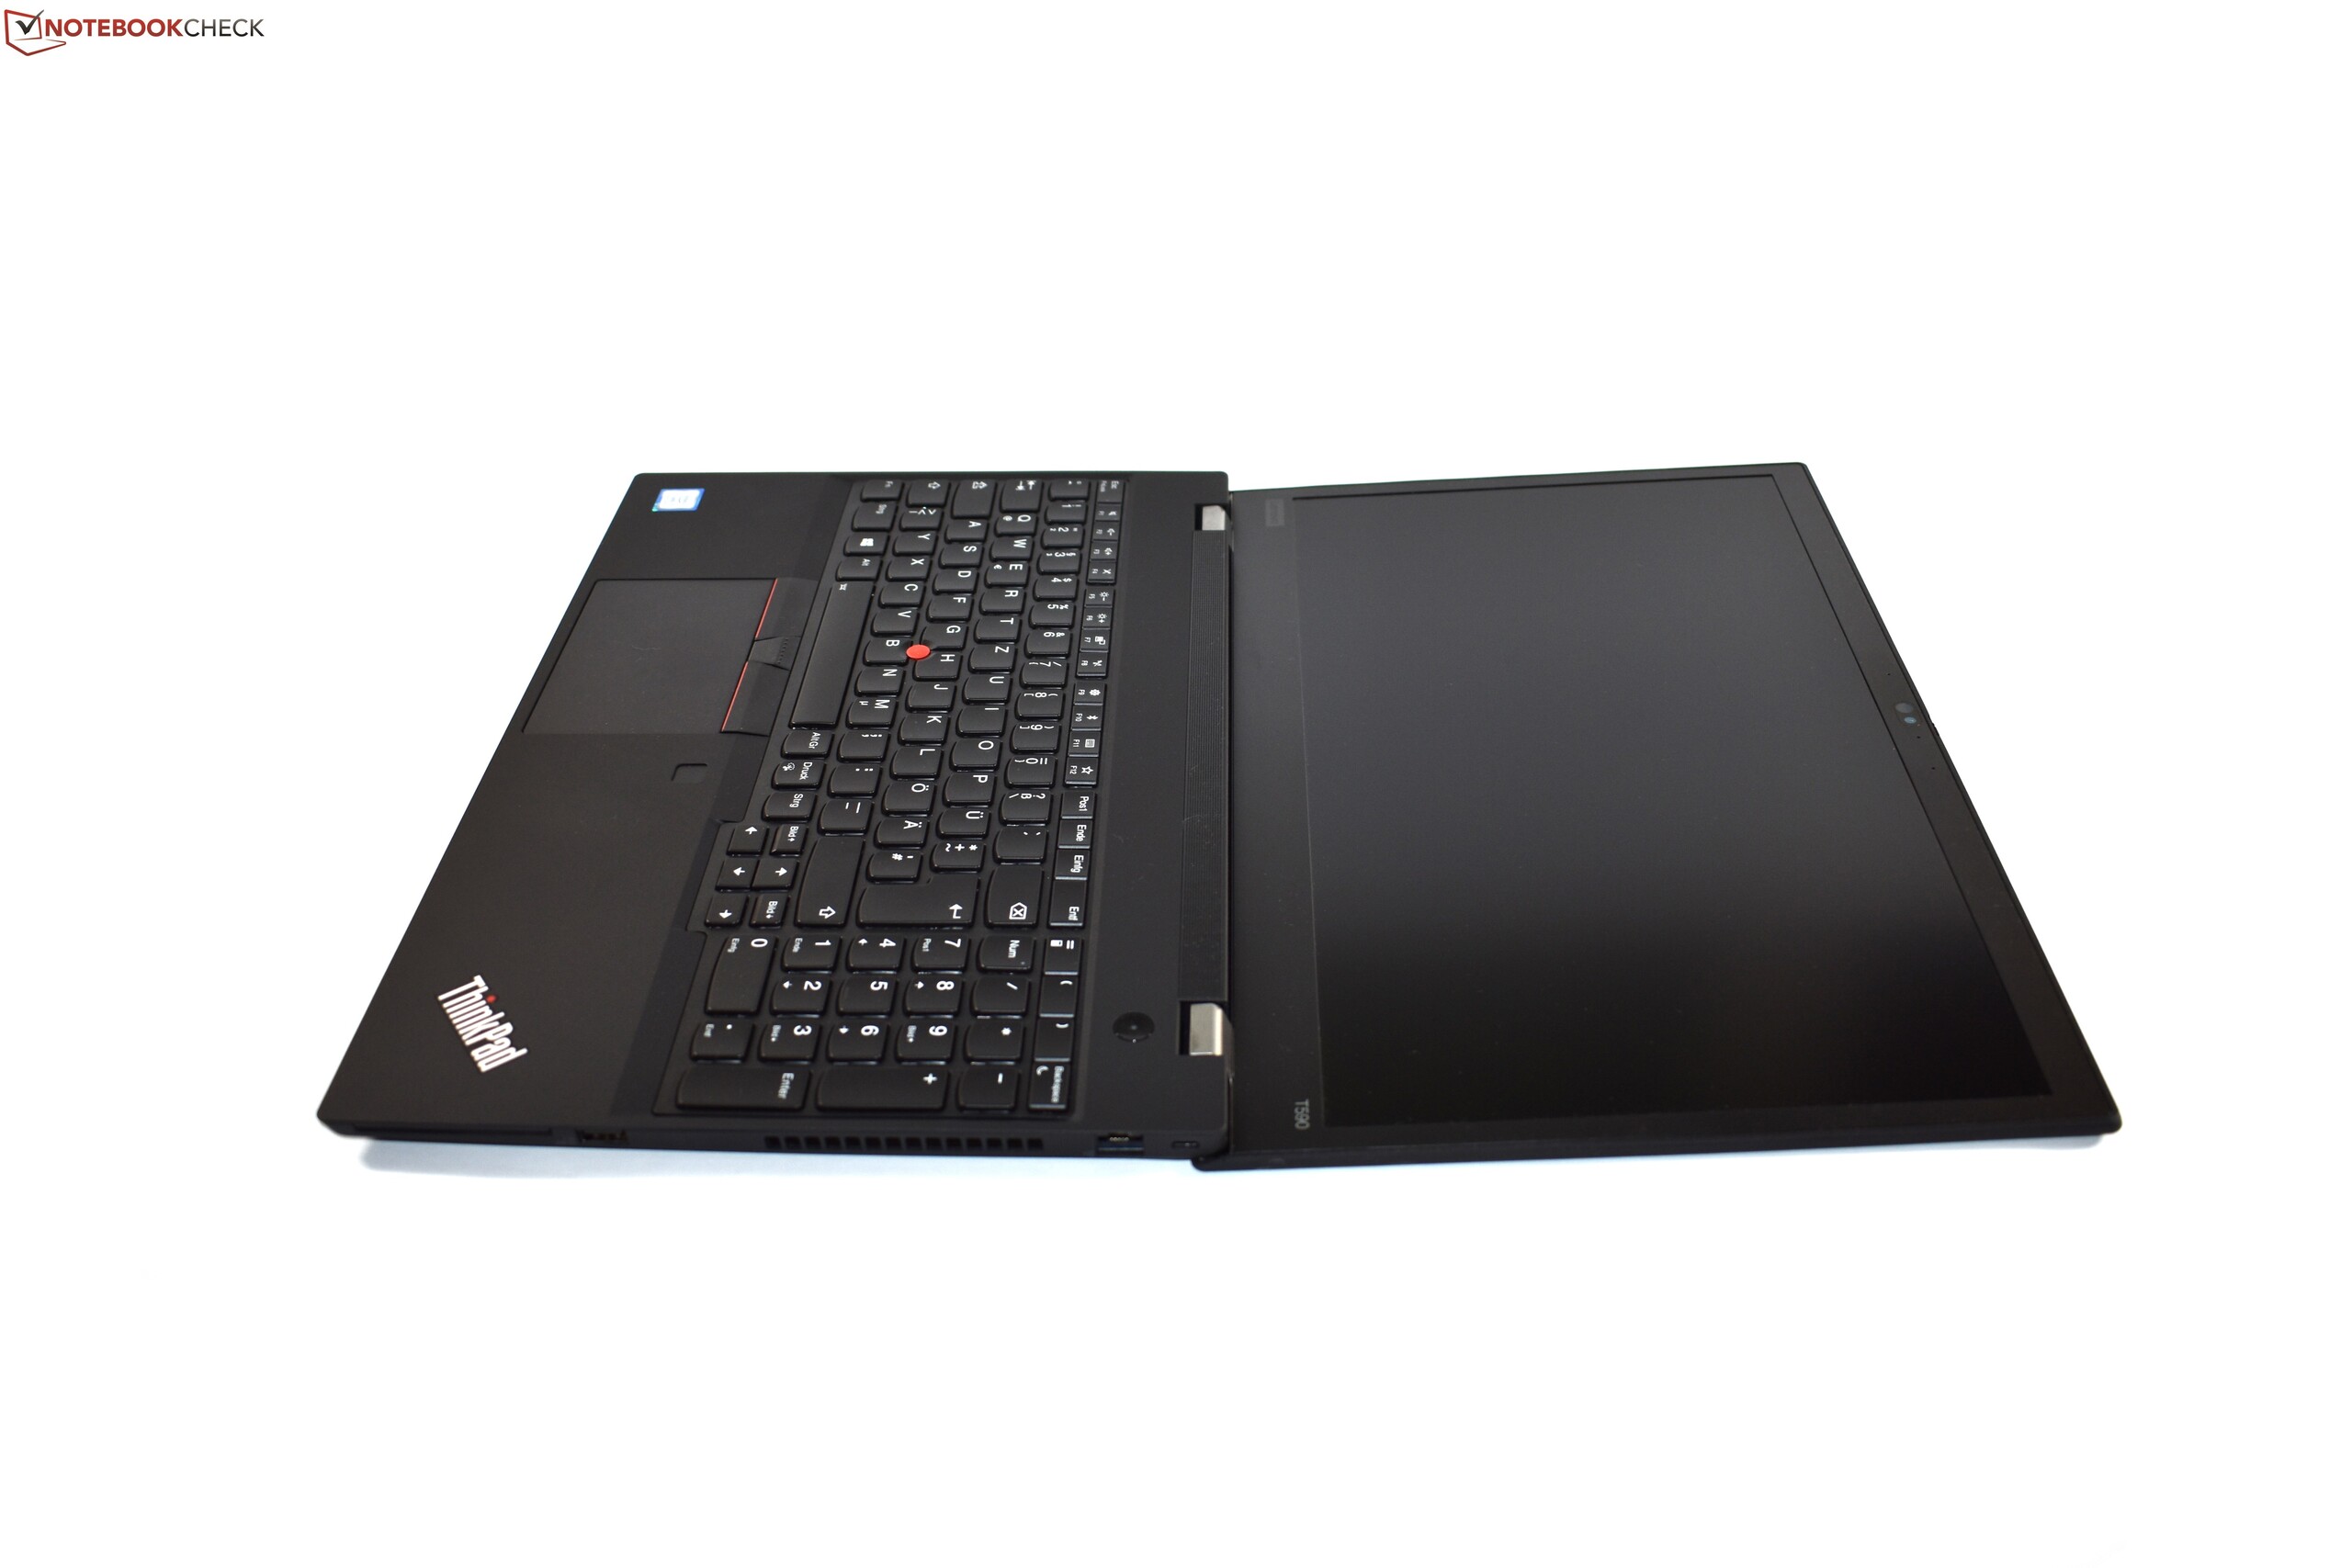 Lenovo ThinkPad T590 laptop review: The 4K display offers 